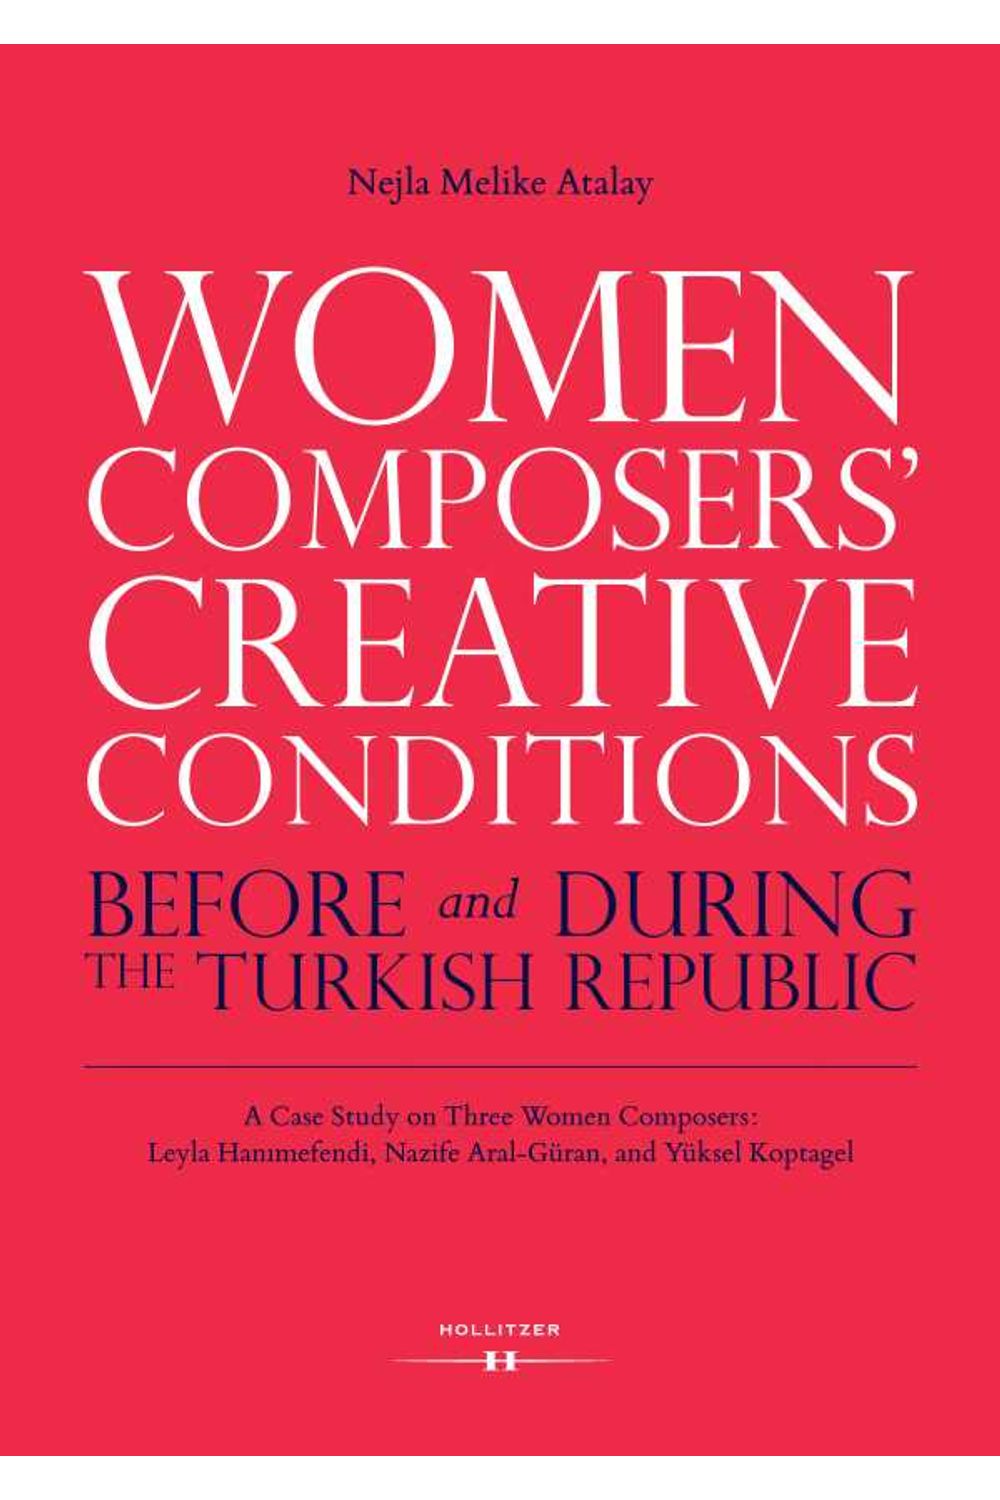 bw-women-composers-creative-conditions-before-and-during-the-turkish-republic-hollitzer-wissenschaftsverlag-9783990128510